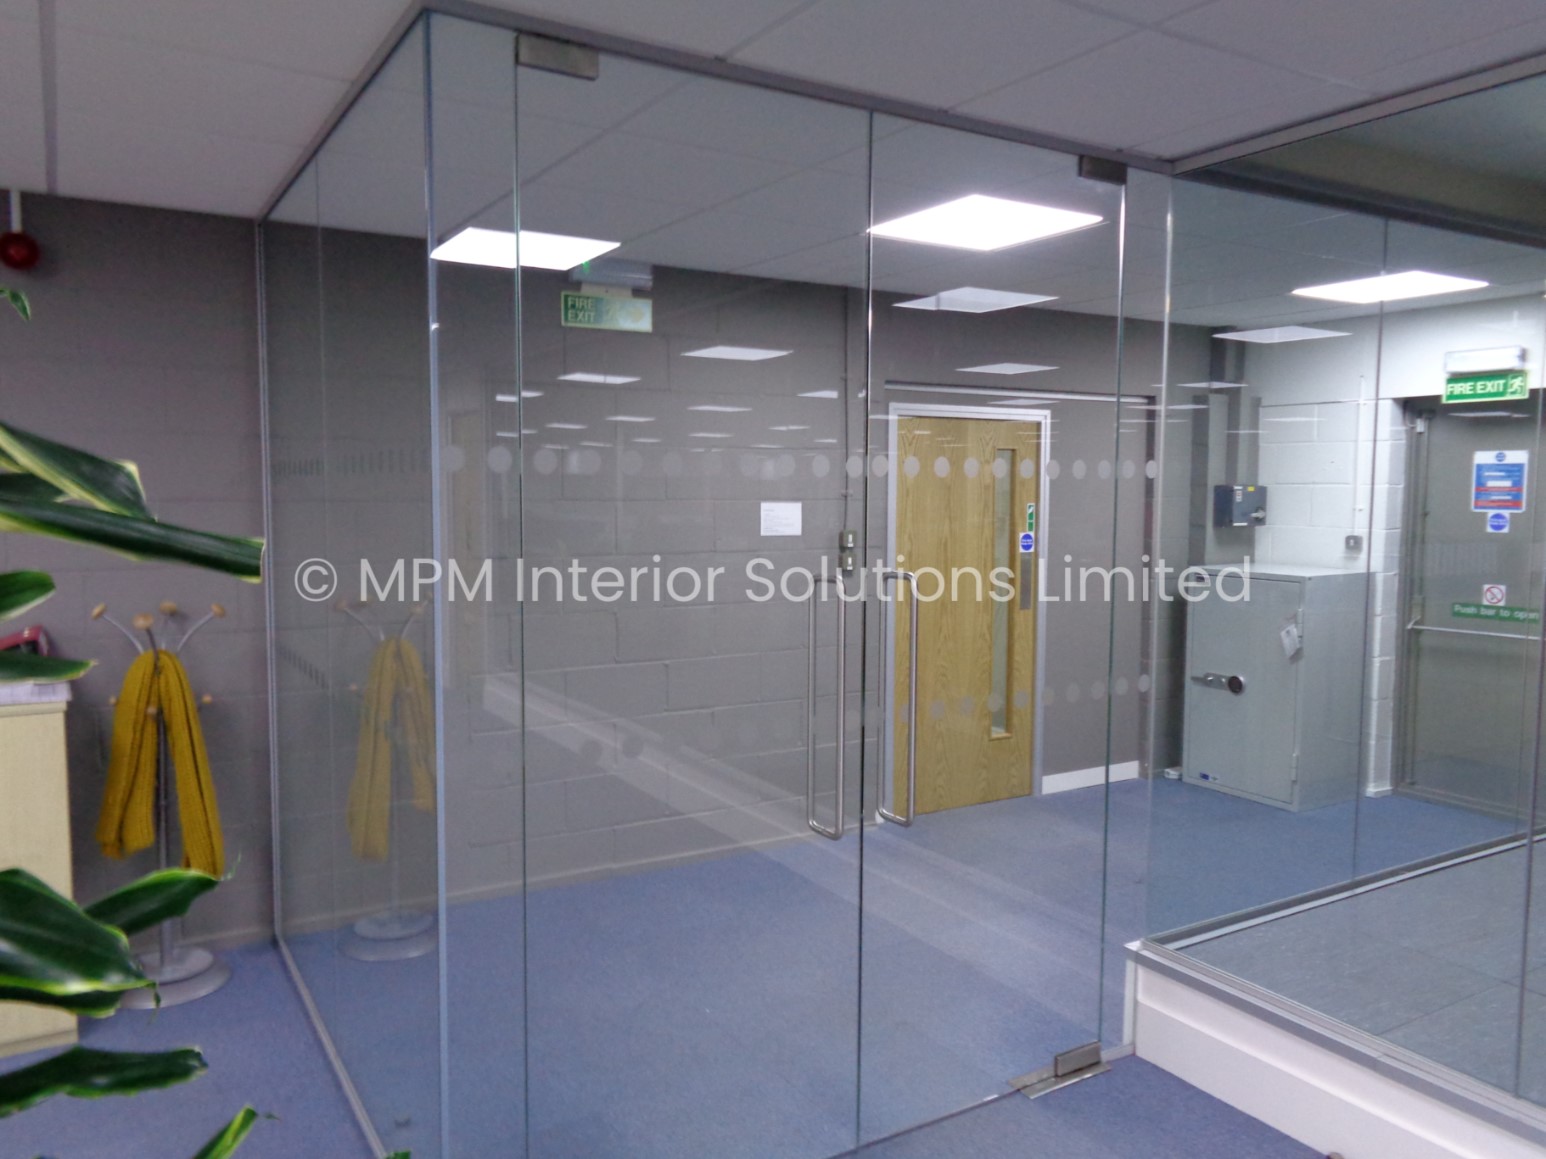 Frameless Glass Office Partitioning, Office Refurbishment/Fit-Out, Keysource Ltd (Horsham, West Sussex), MPM Interior Solutions Limited